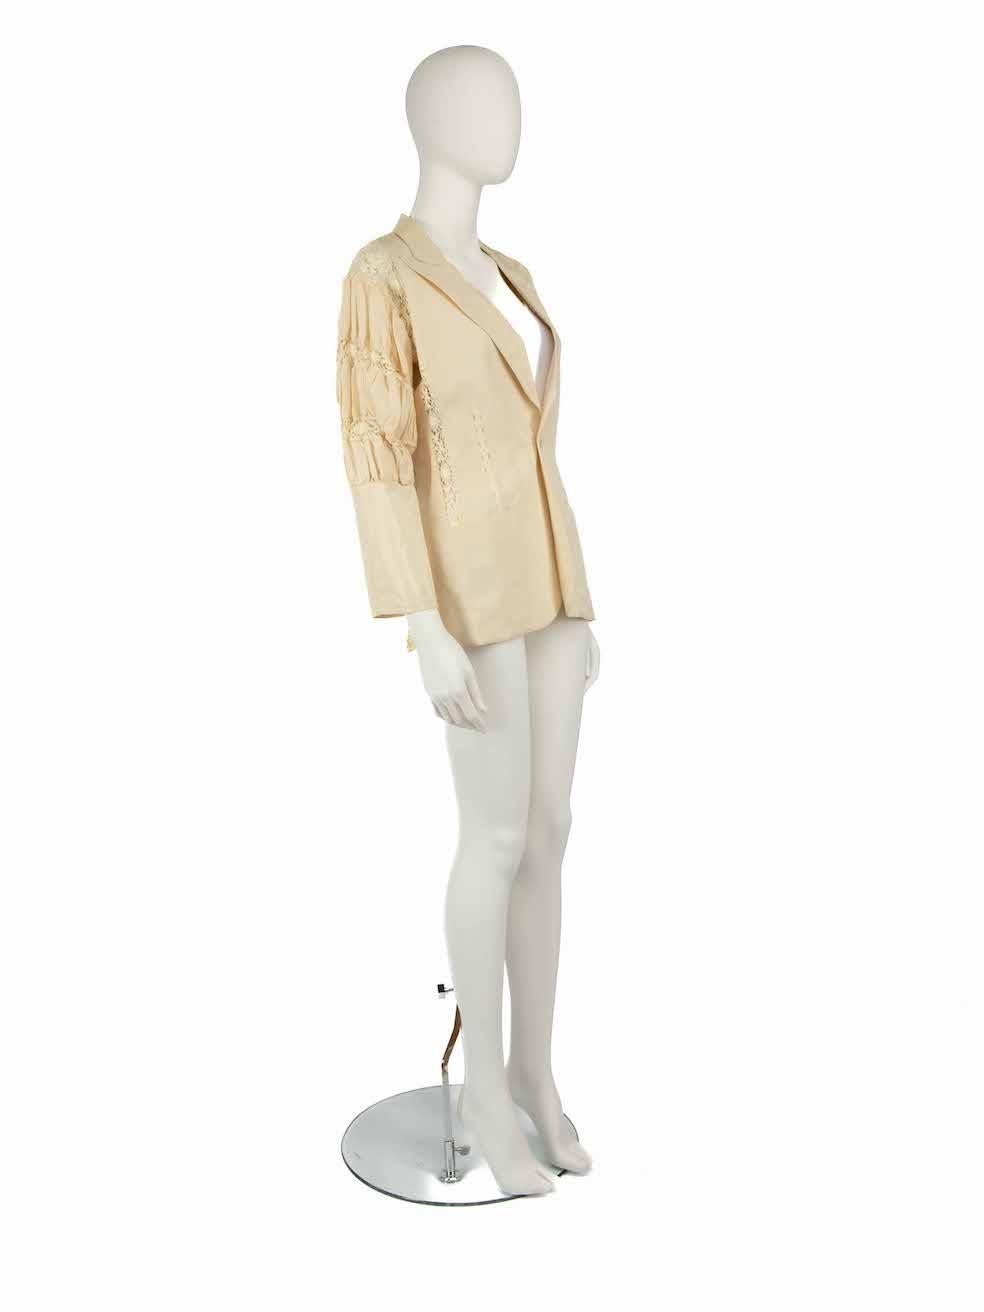 CONDITION is Very good. Hardly any visible wear to blazer is evident on this used Jean Paul Gaultier Femme designer resale item.
 
 Details
 Beige
 Polyester
 Blazer
 Lace trim
 Long sleeves
 2x Front pockets
 Button fastening
 
 
 Made in Italy
 
